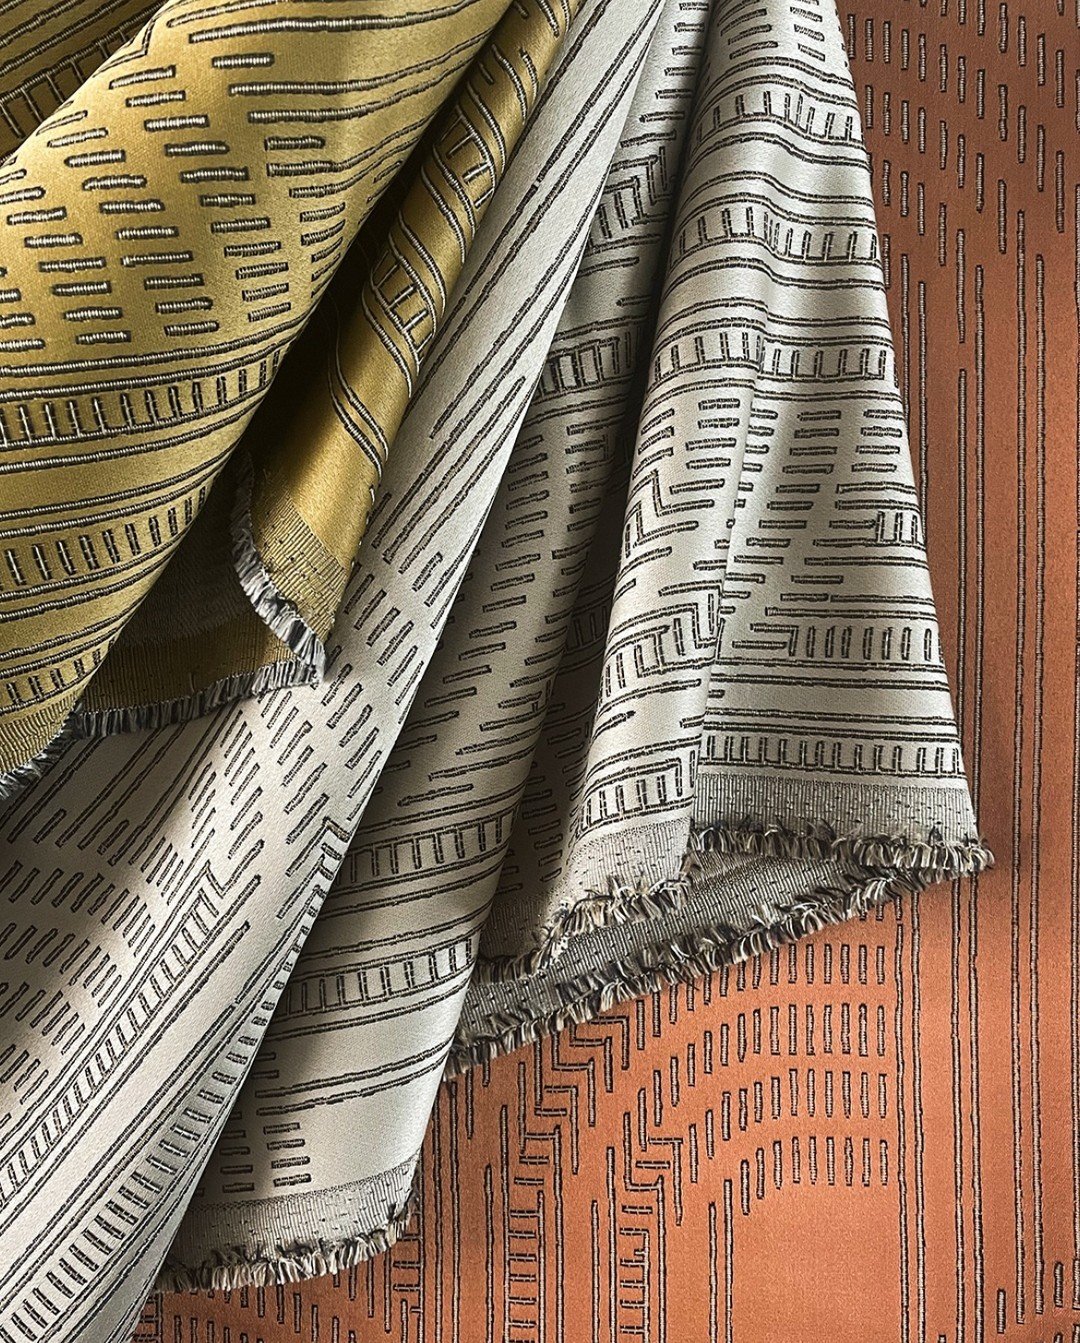 PRODIGE | Made in Italy, this double width polyester FR fabric surrounds you with luxury and refinement.

#lasvegashospitalitydesign #tothetrade #residentialdesign #textiles #fabric #upholstery #lasvegasdrapery #wallcovering #interiordesign #lasvegas